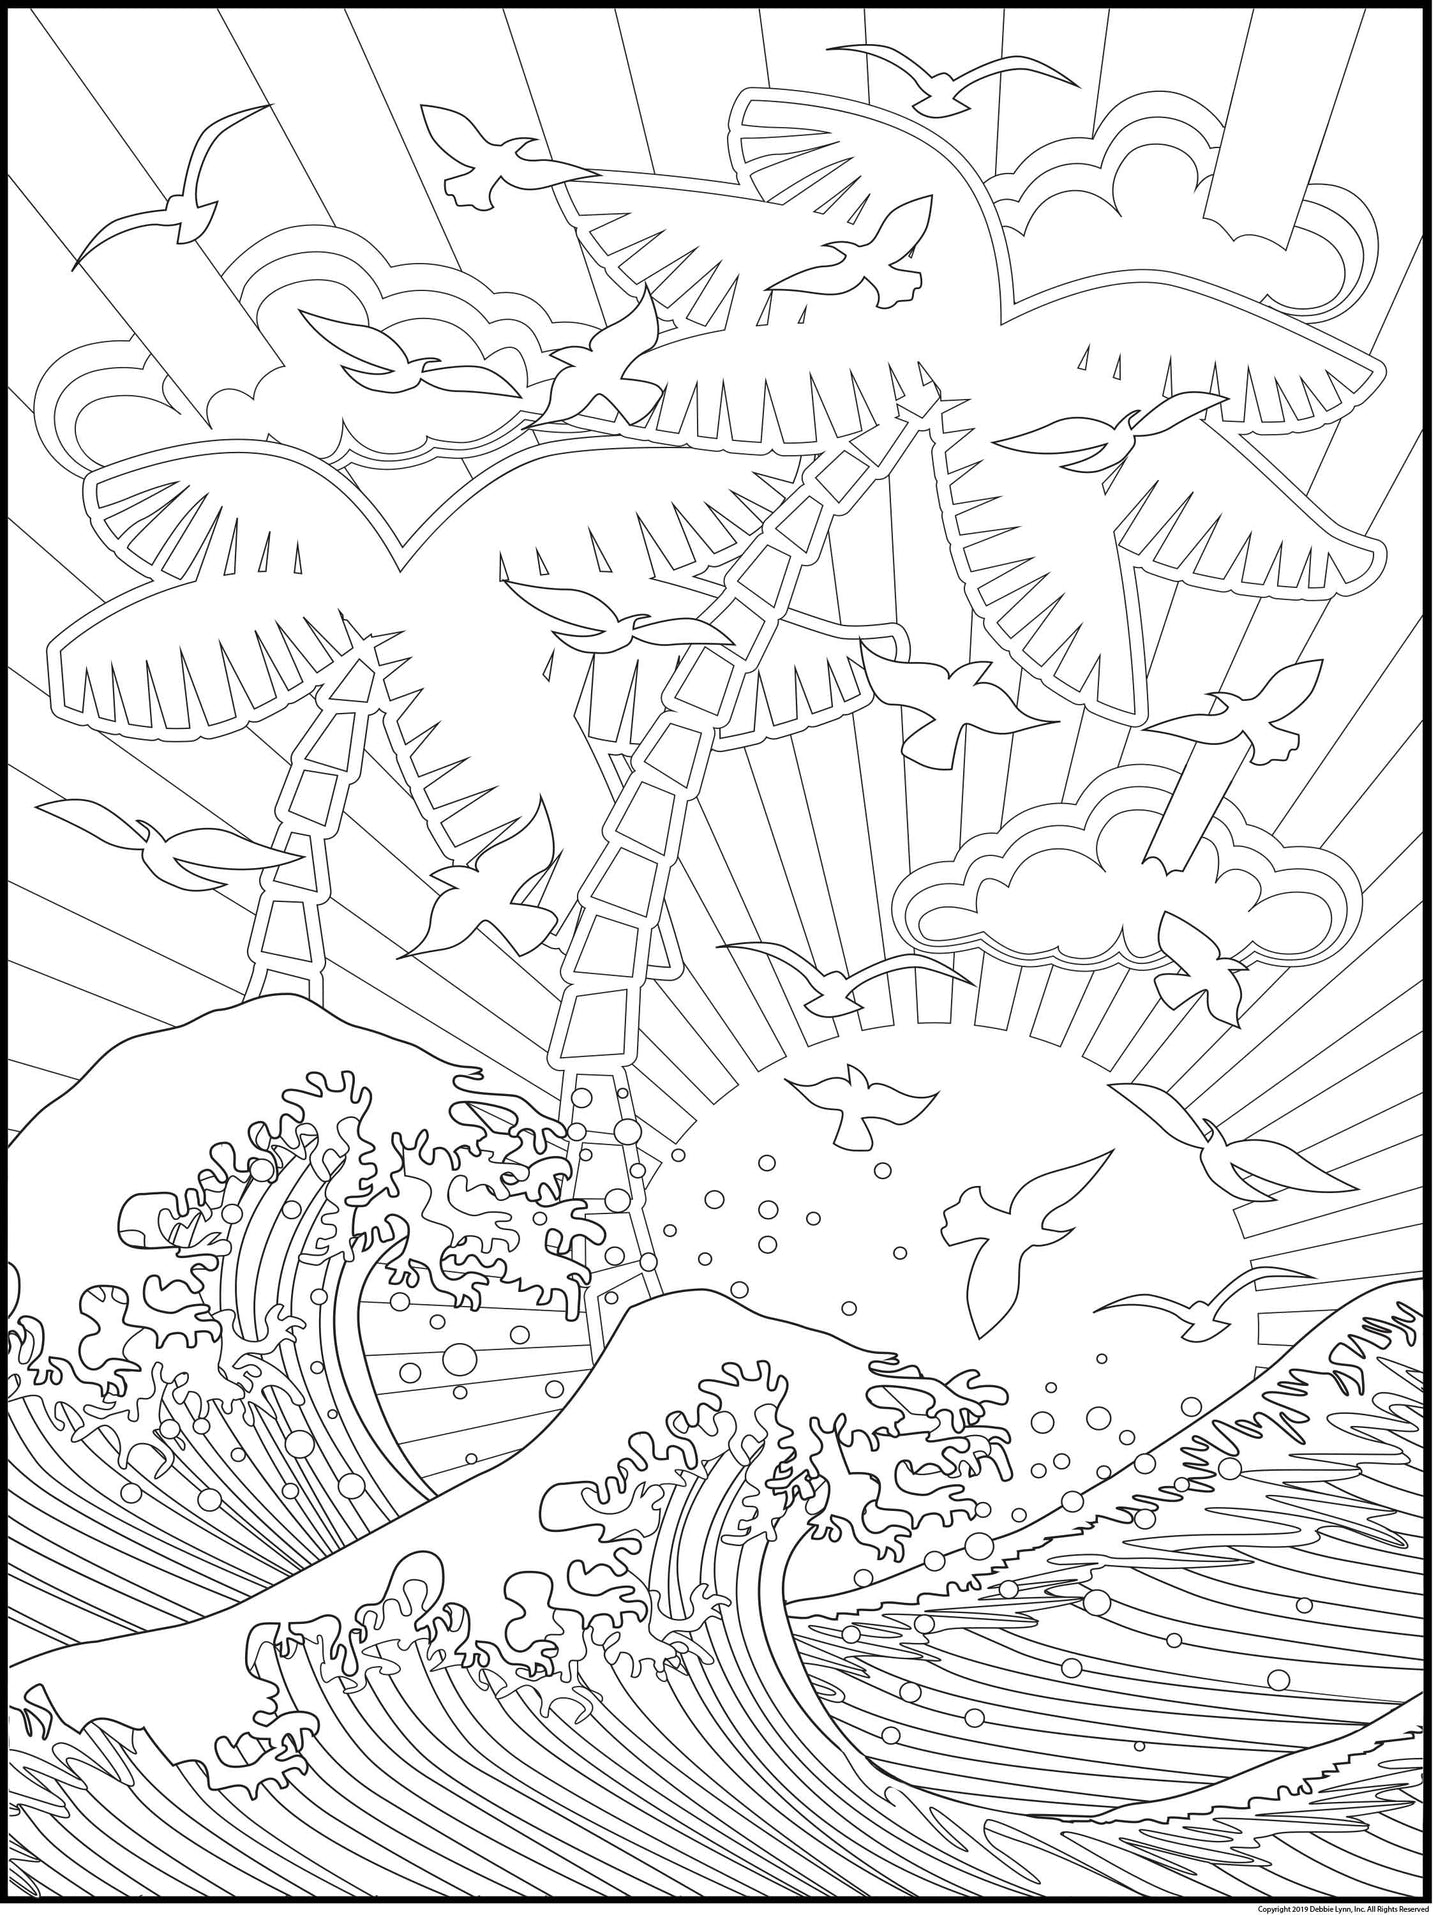 Sunset Wave Personalized Giant Coloring Poster 46"x60"